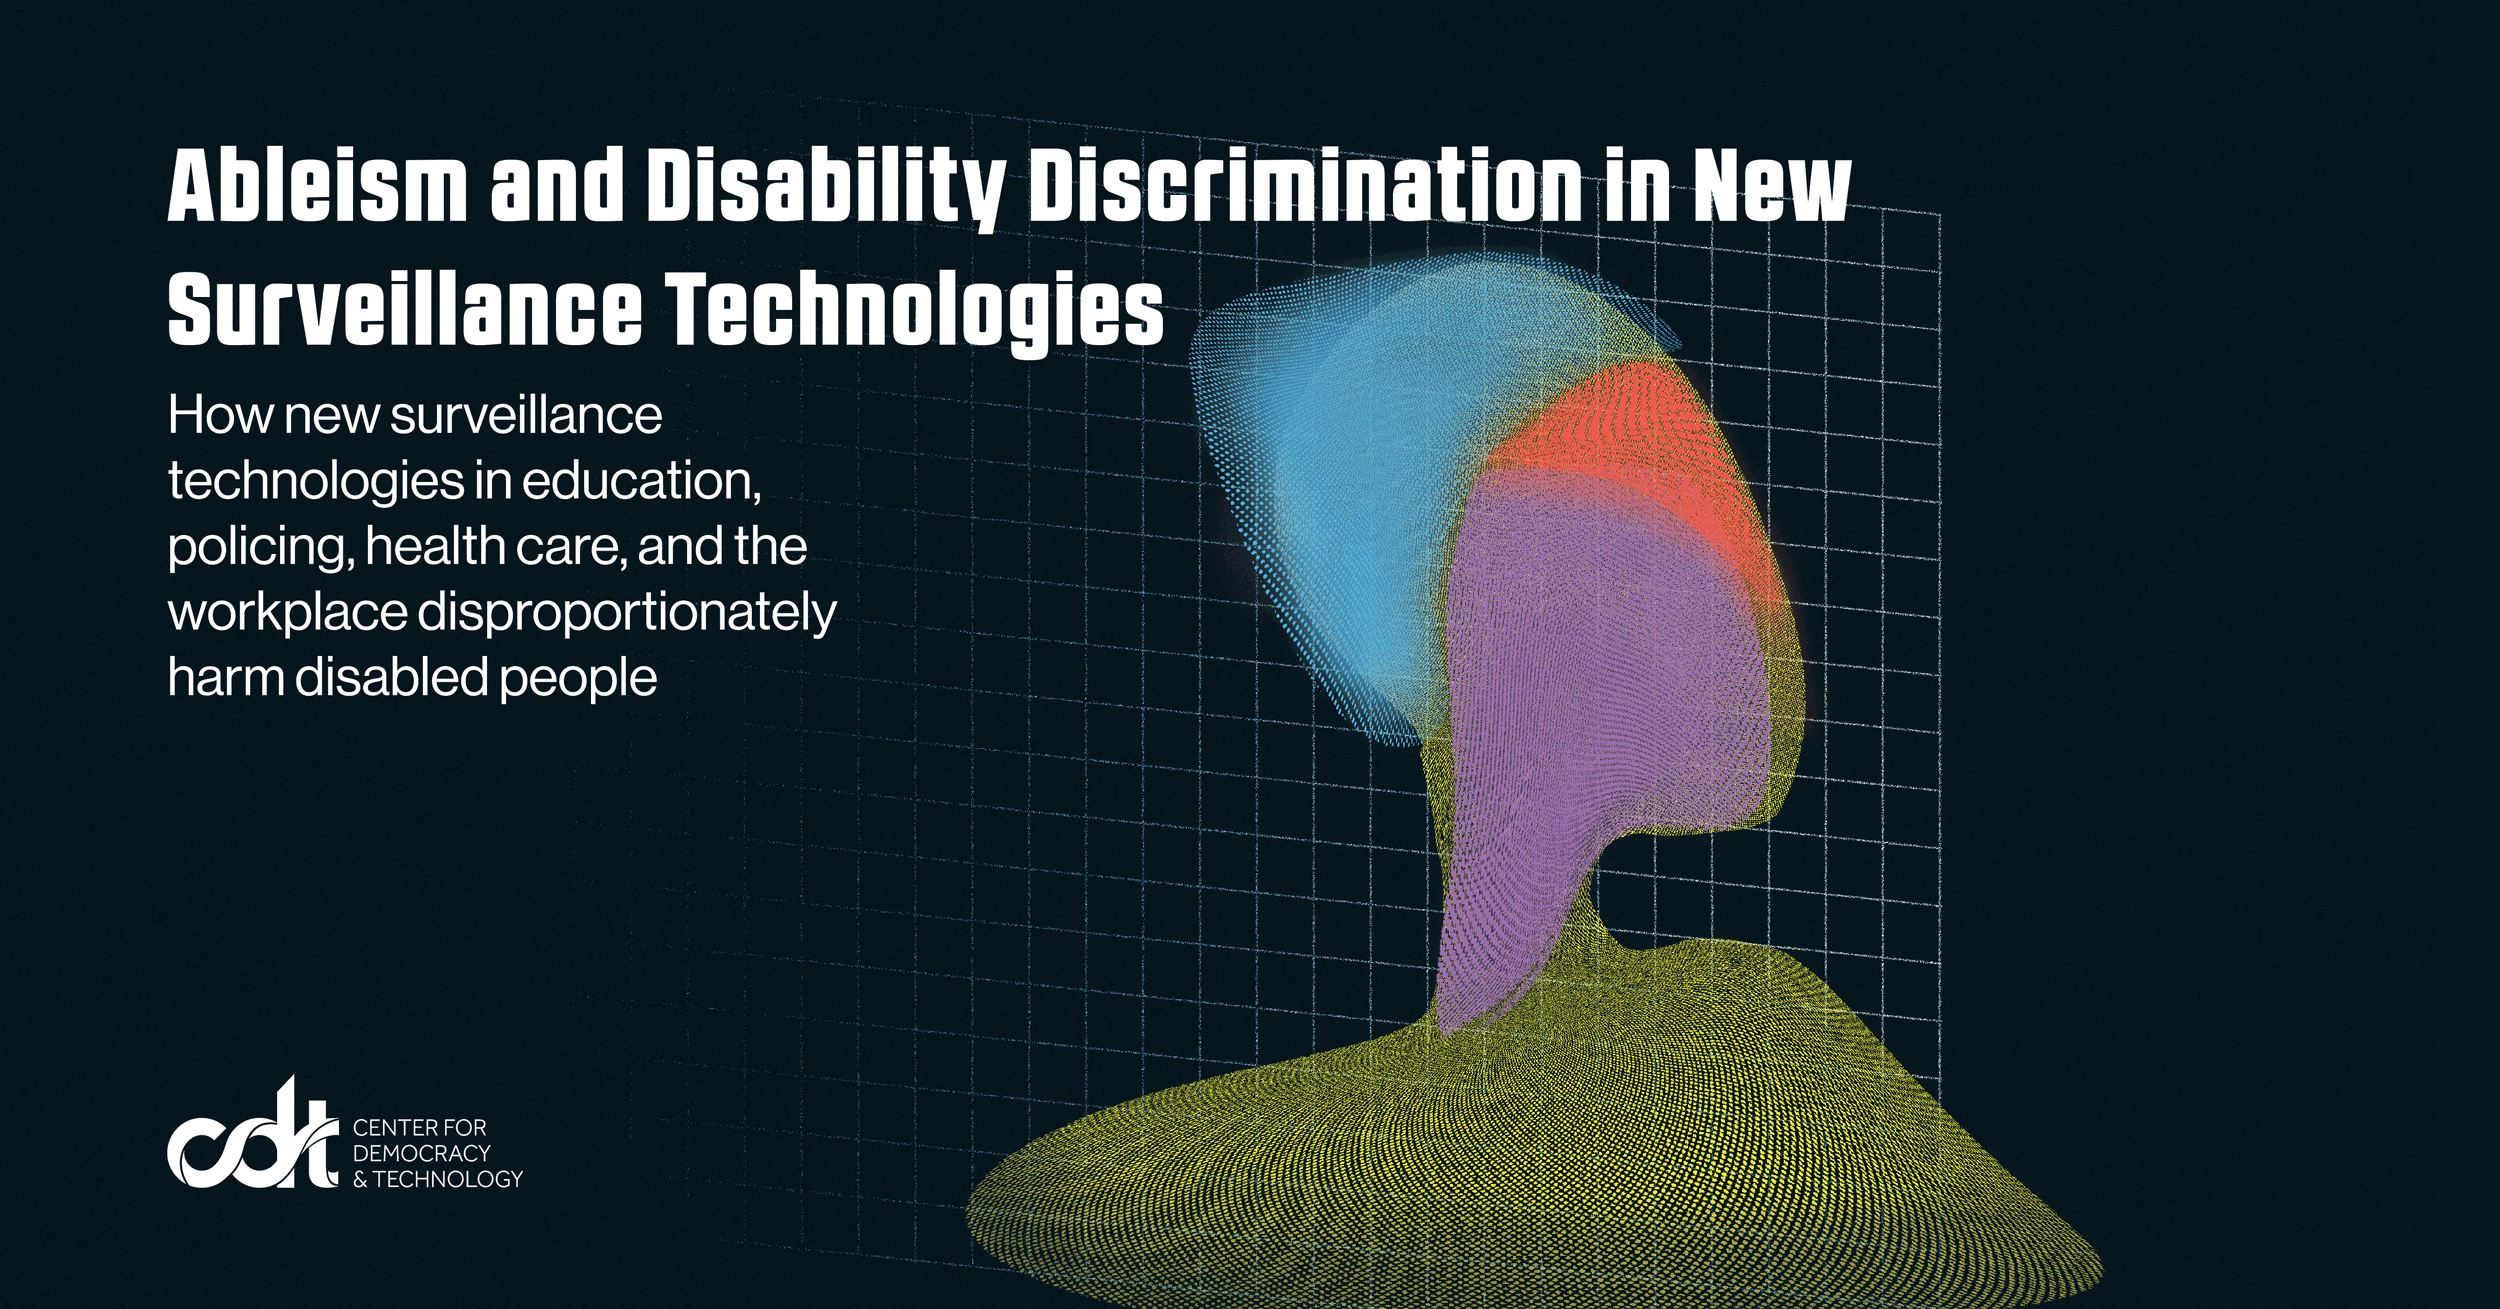 Ableism And Disability Discrimination In New Surveillance Technologies